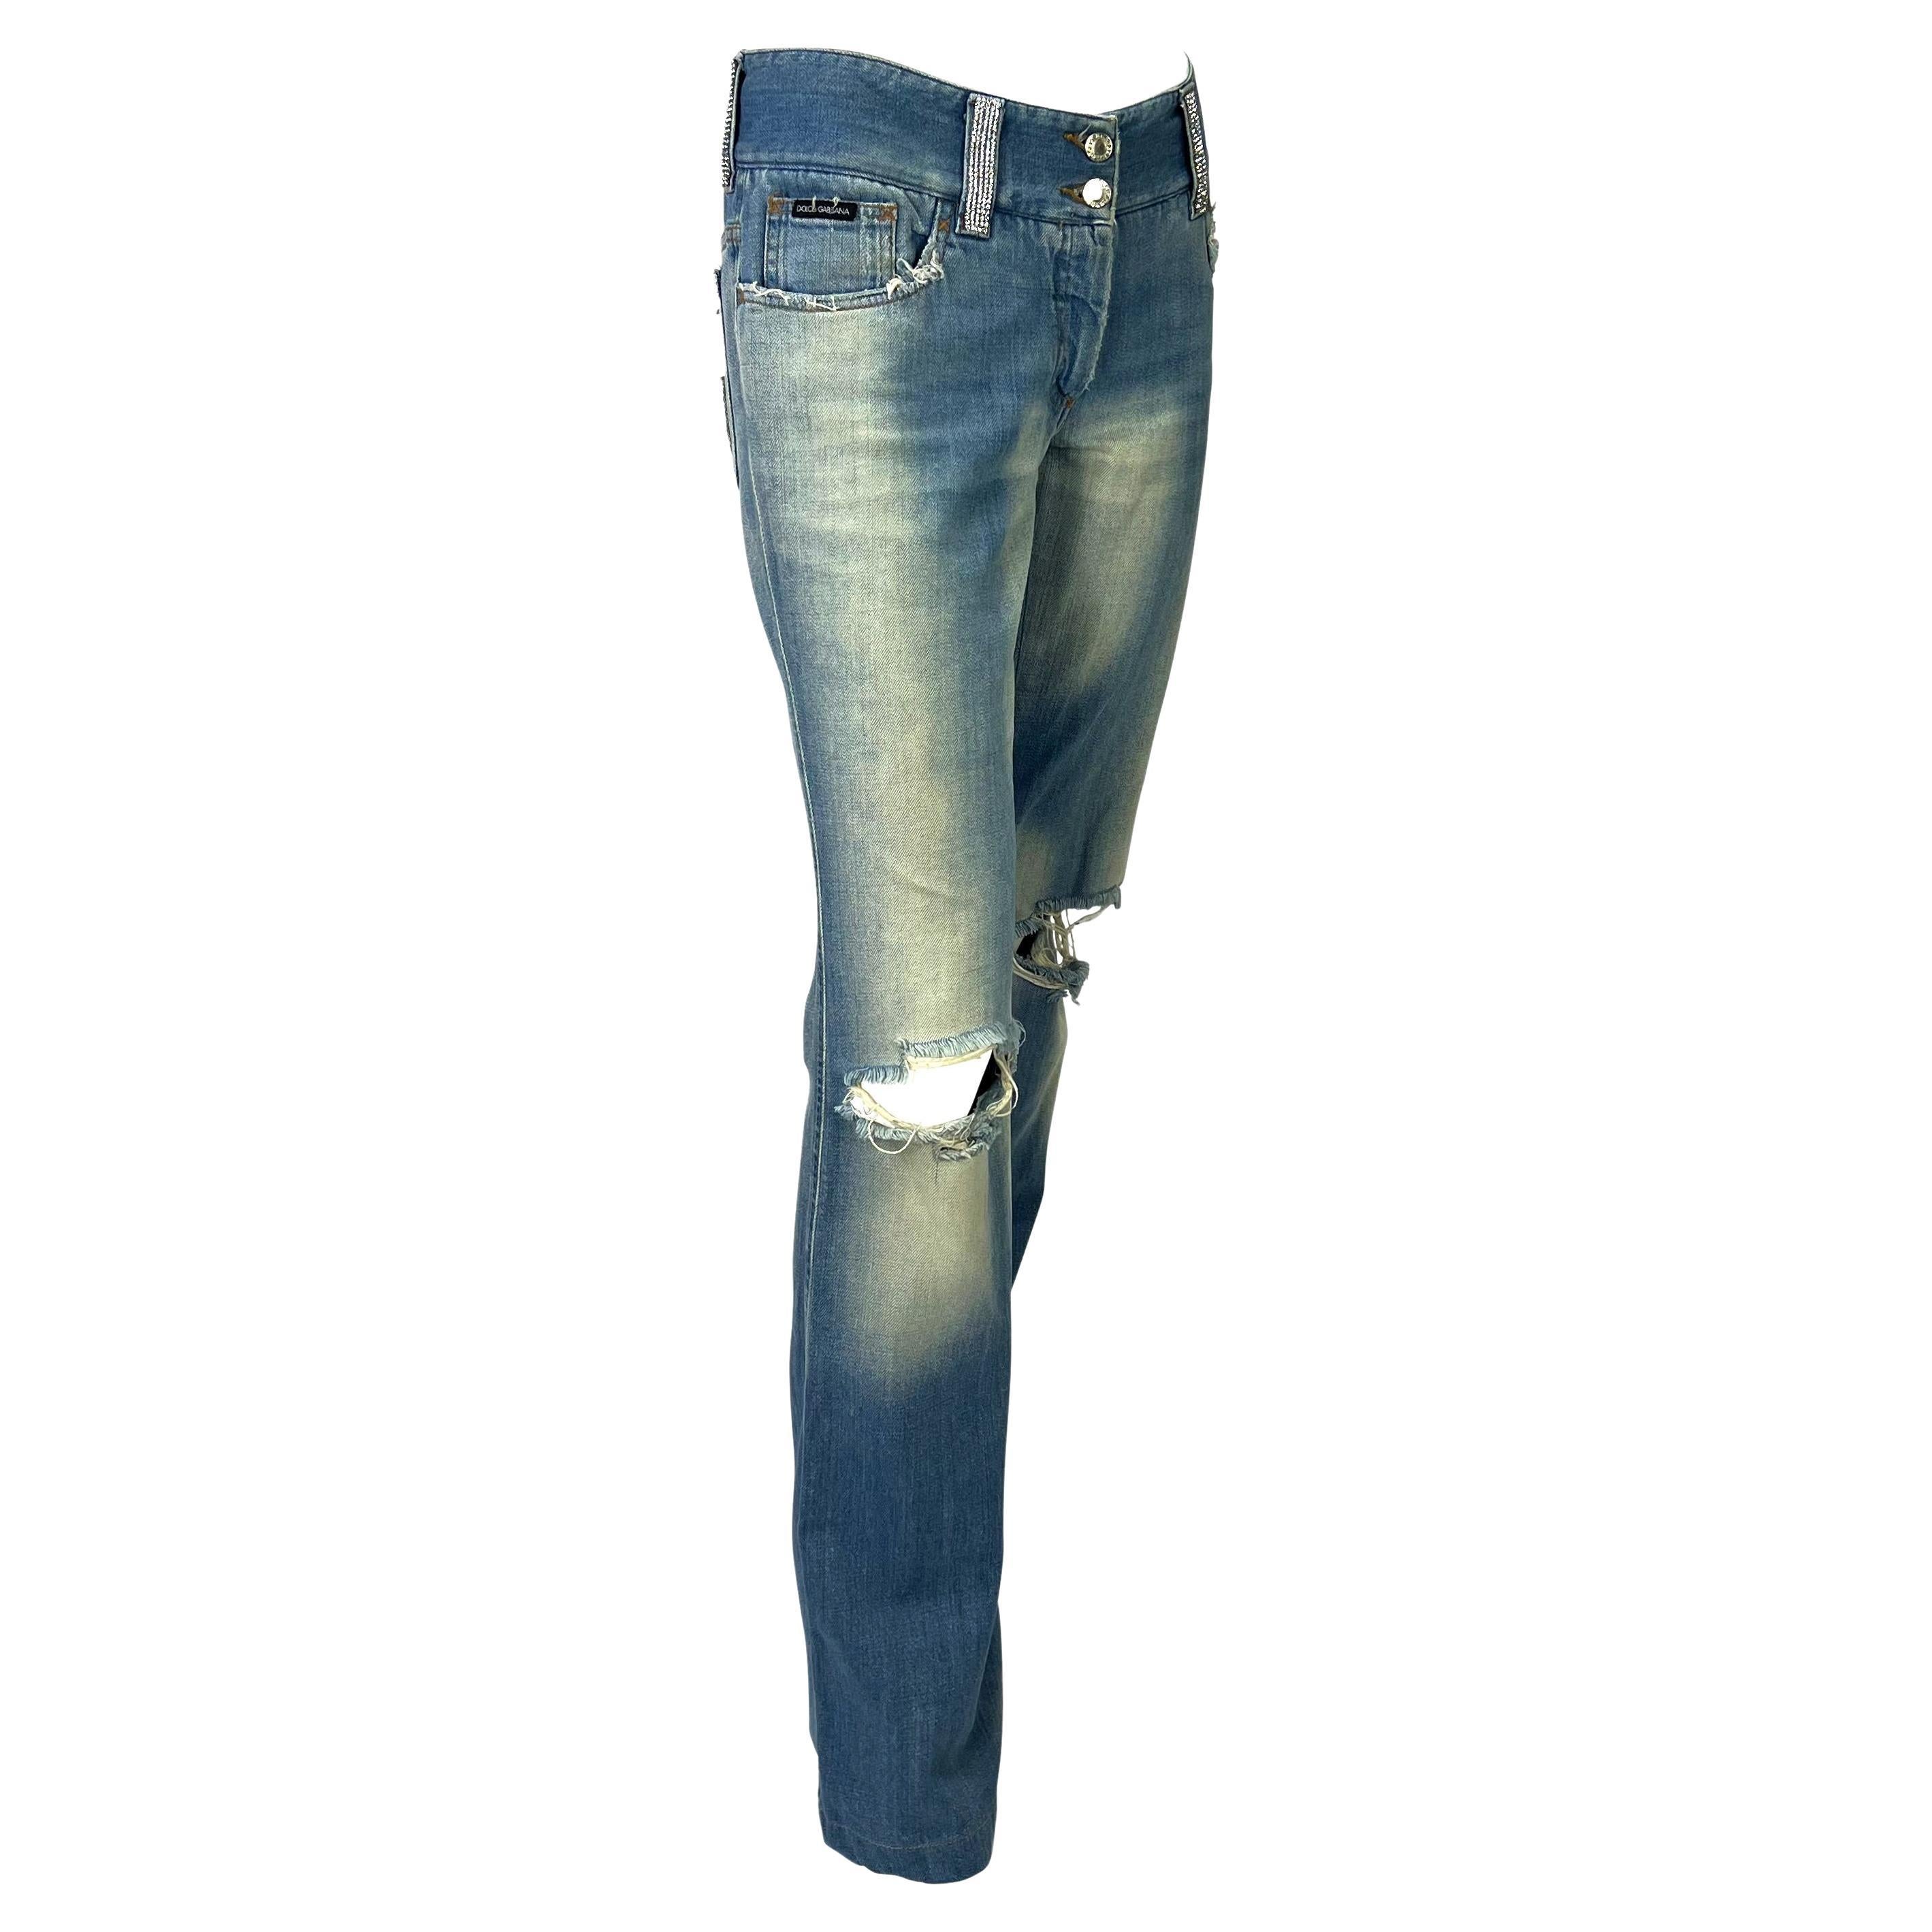 Women's S/S 2003 Dolce & Gabbana 'Sex & Love' Rhinestone Chainmail Distressed Jeans For Sale